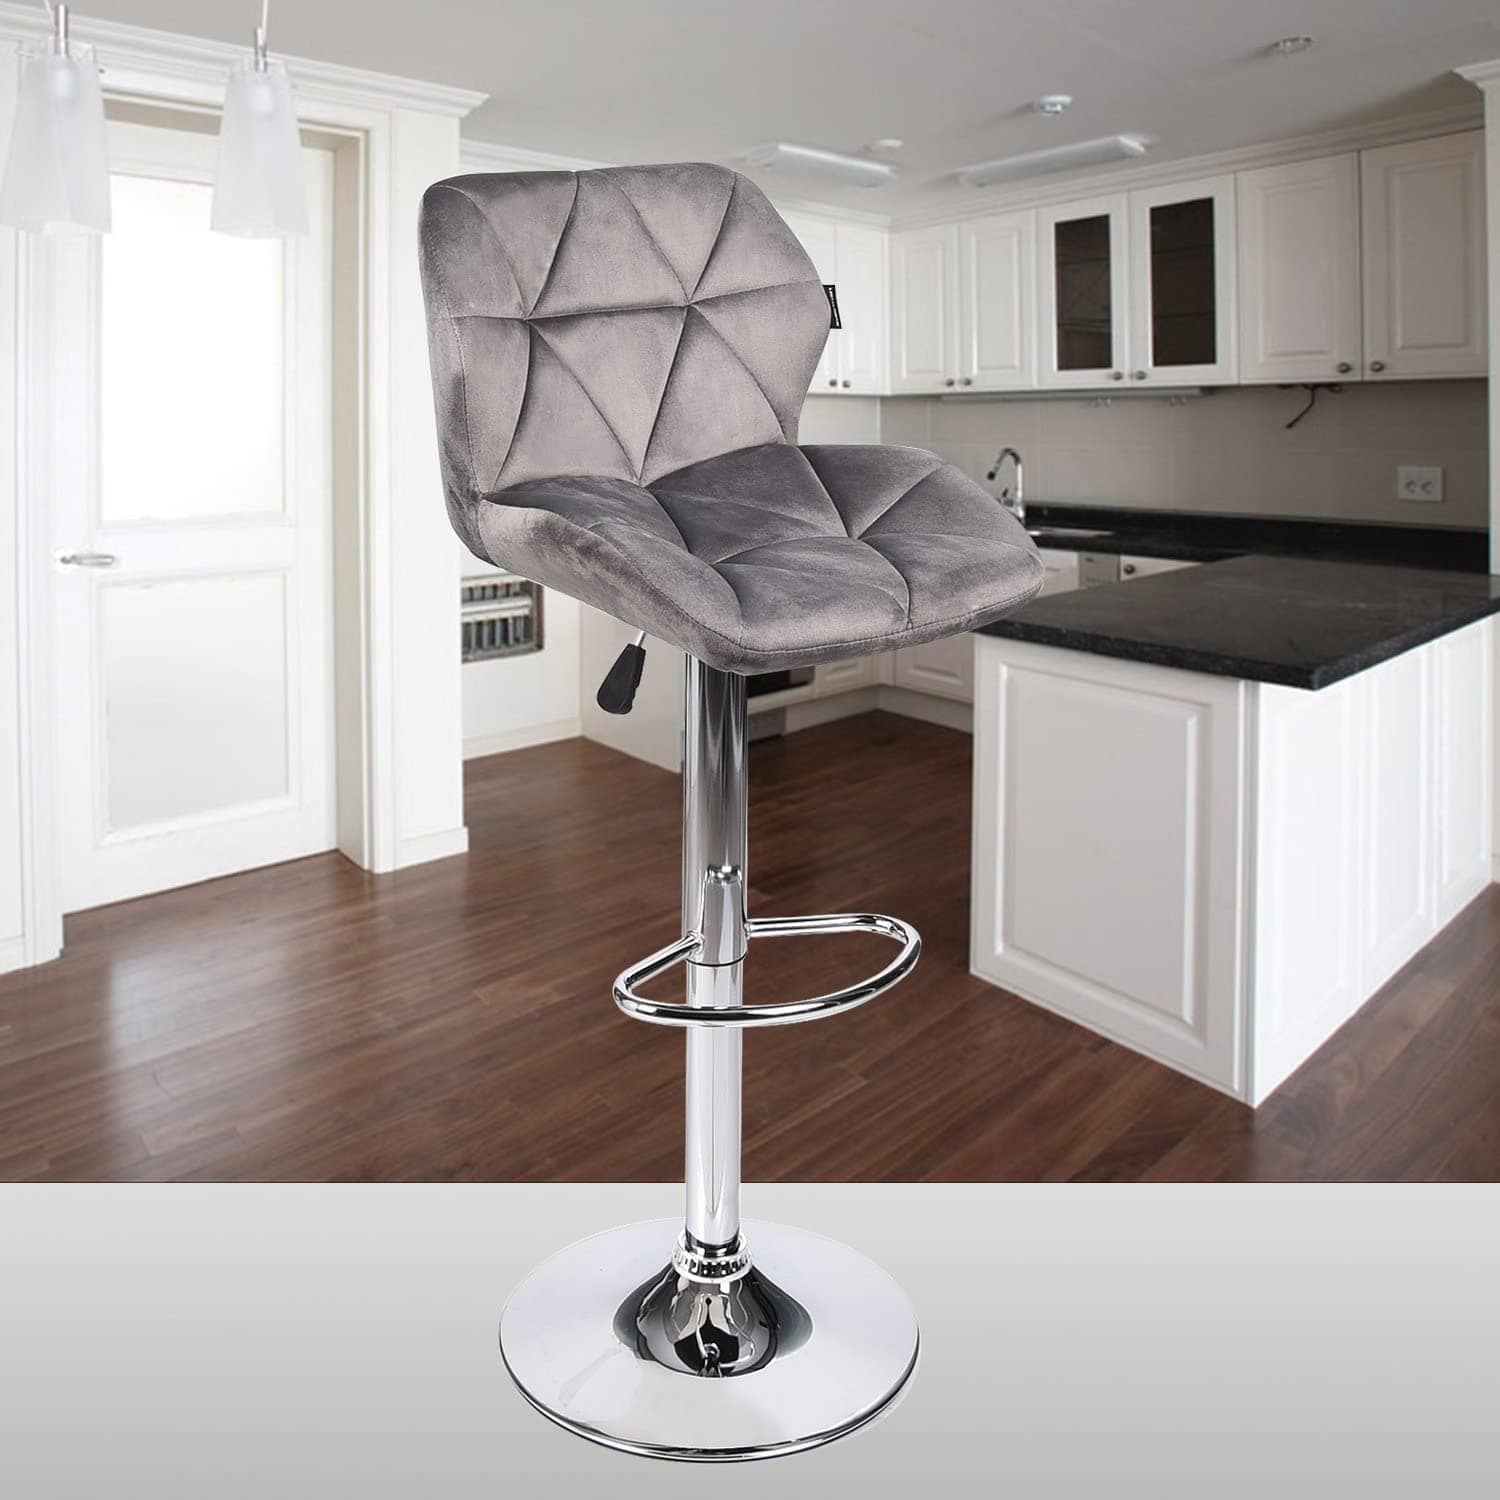 Elecwish Bar Stools OW005 is perfect for kitchen